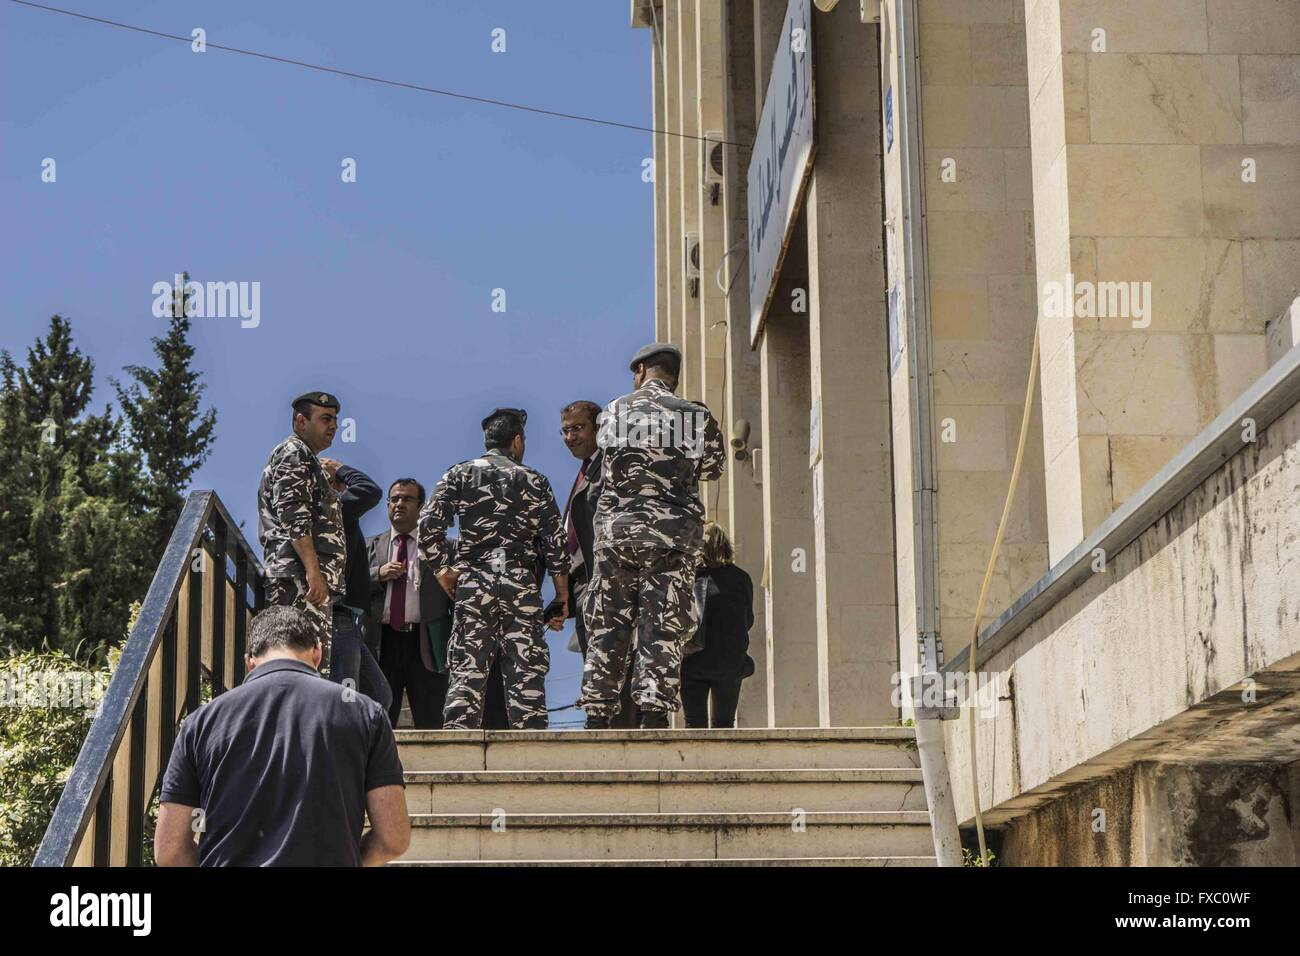 Beirut, Lebanon. 13th Apr, 2016. Apr 13, 2016 - Beirut, Lebanon - Courthouse where Sally Faulkner of Brisbane, Australia, and members of the Australian TV show '60 Minutes', a Nine Network production, are being held after abducting her two children from the custody of her estranged husband, Ali Zeid al-Amin, a surfing instructor who lives south of the Lebanese capital, Beirut. Tara Brown, the presenter famous from 60 Minutes, reporter Stephen Rice, cameraman Ben Williamson and sound recordist David Ballment were arrested while in Beirut to cover the story of Brisbane mother Sally Faulkner, Stock Photo